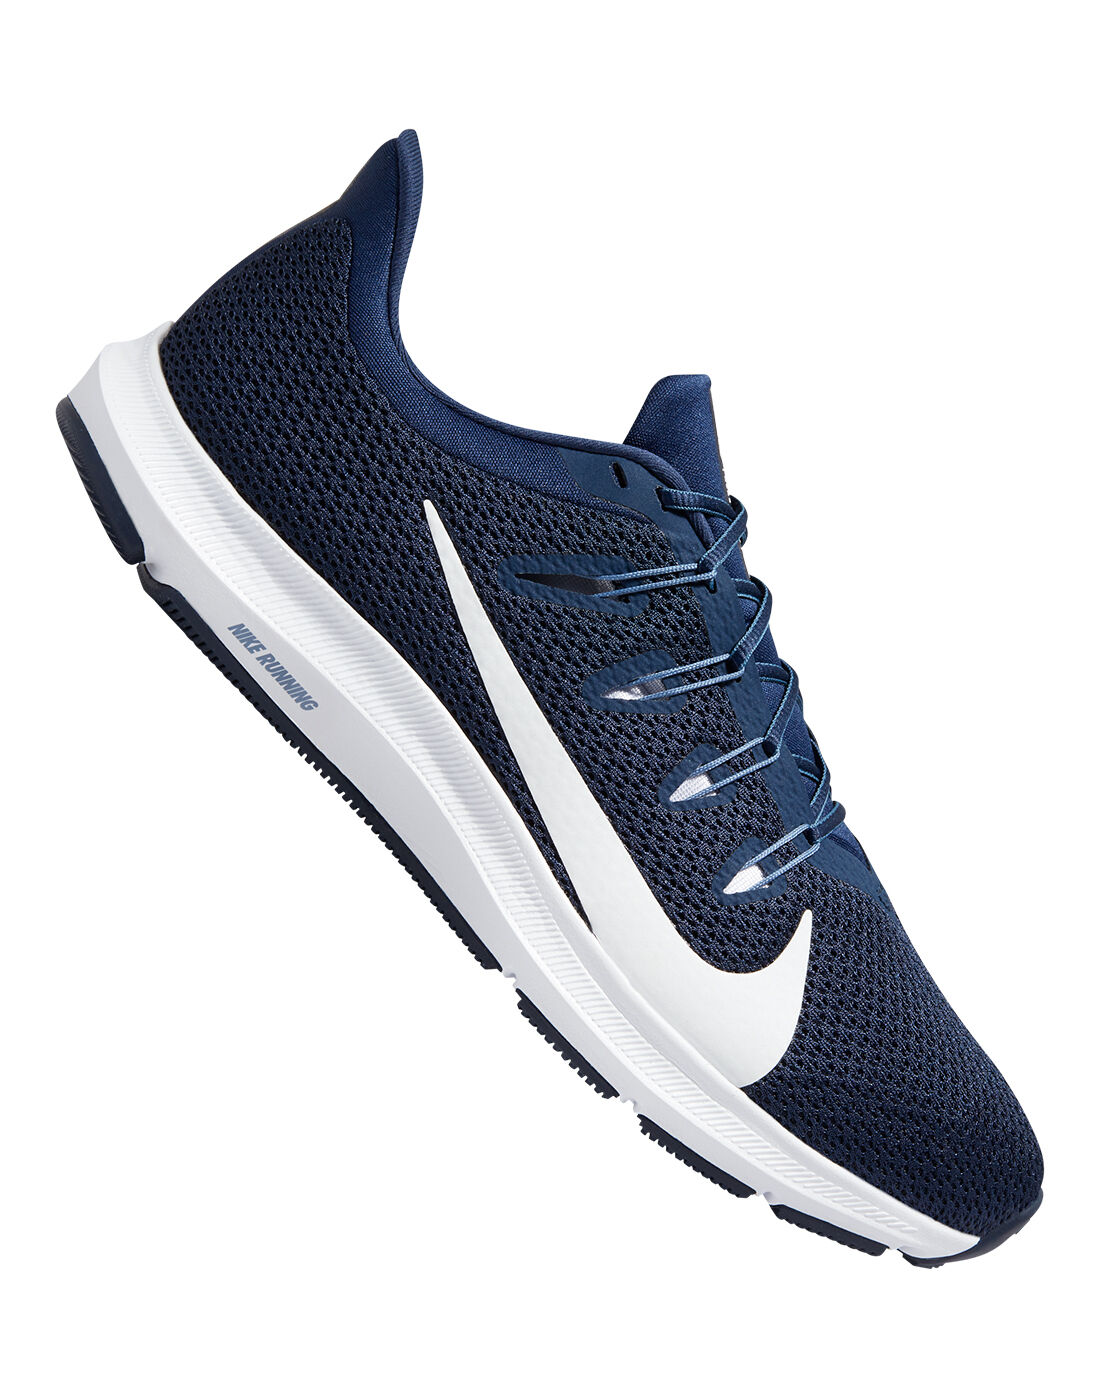 nike quest blue running shoes